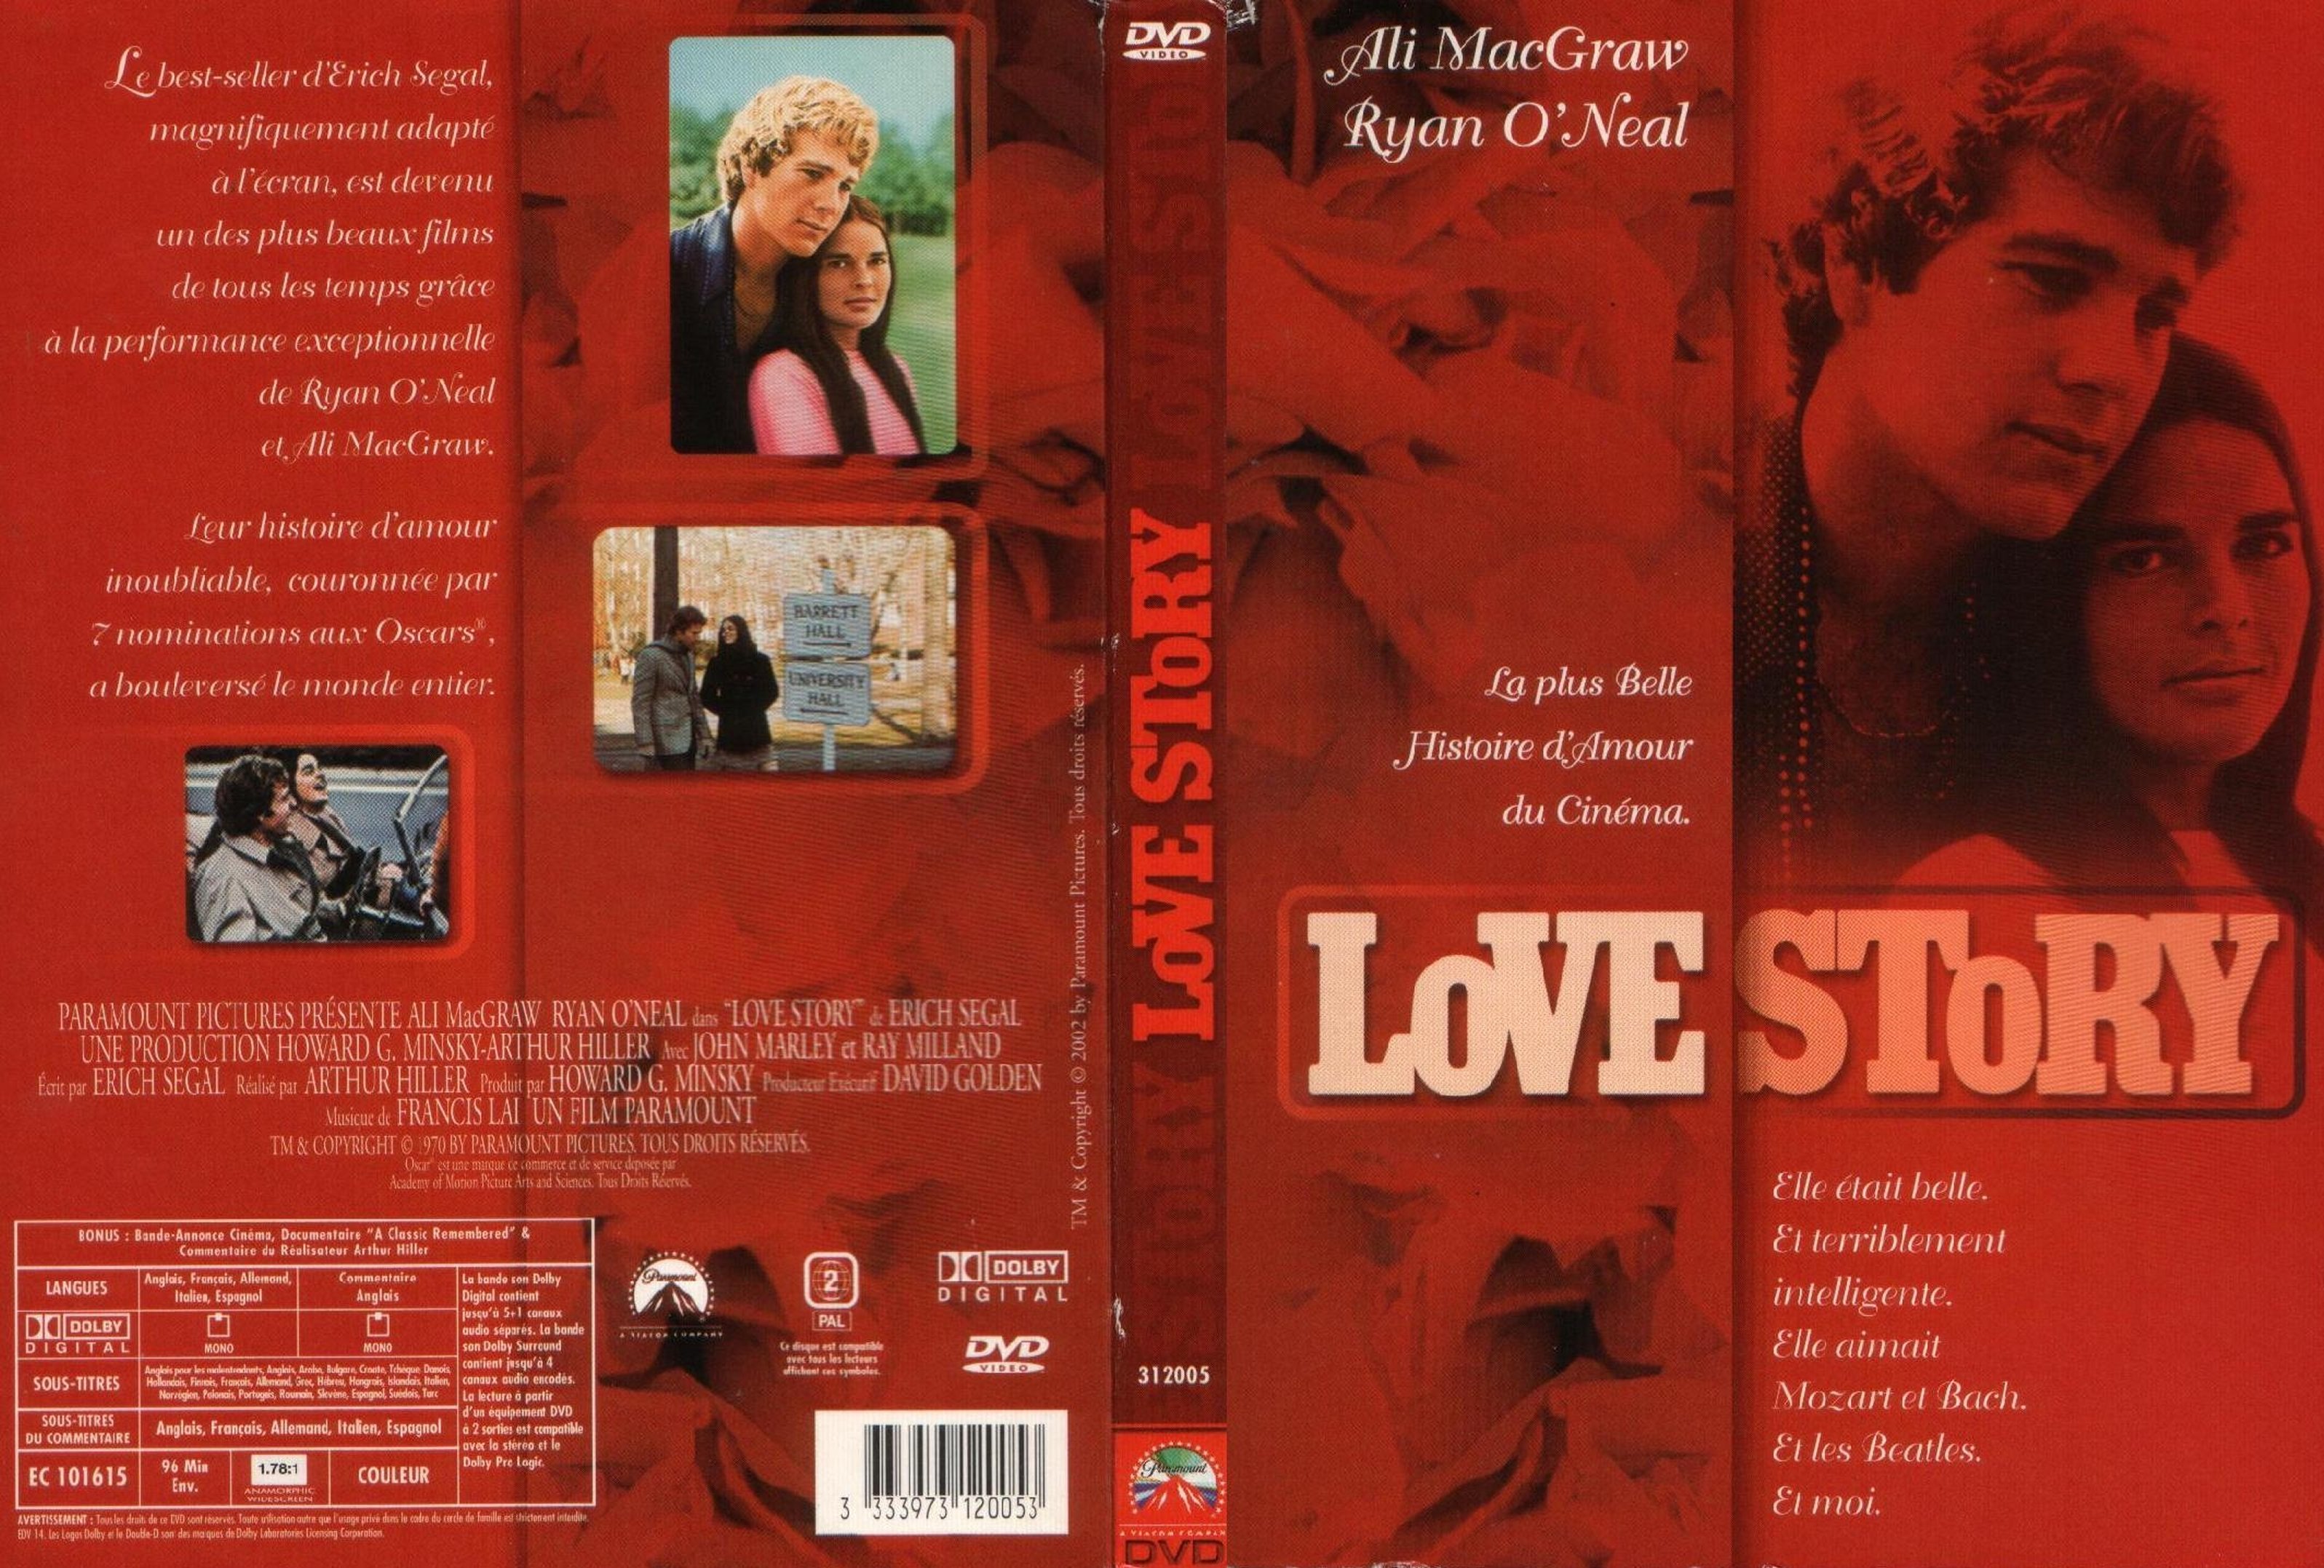 Jaquette DVD Love story